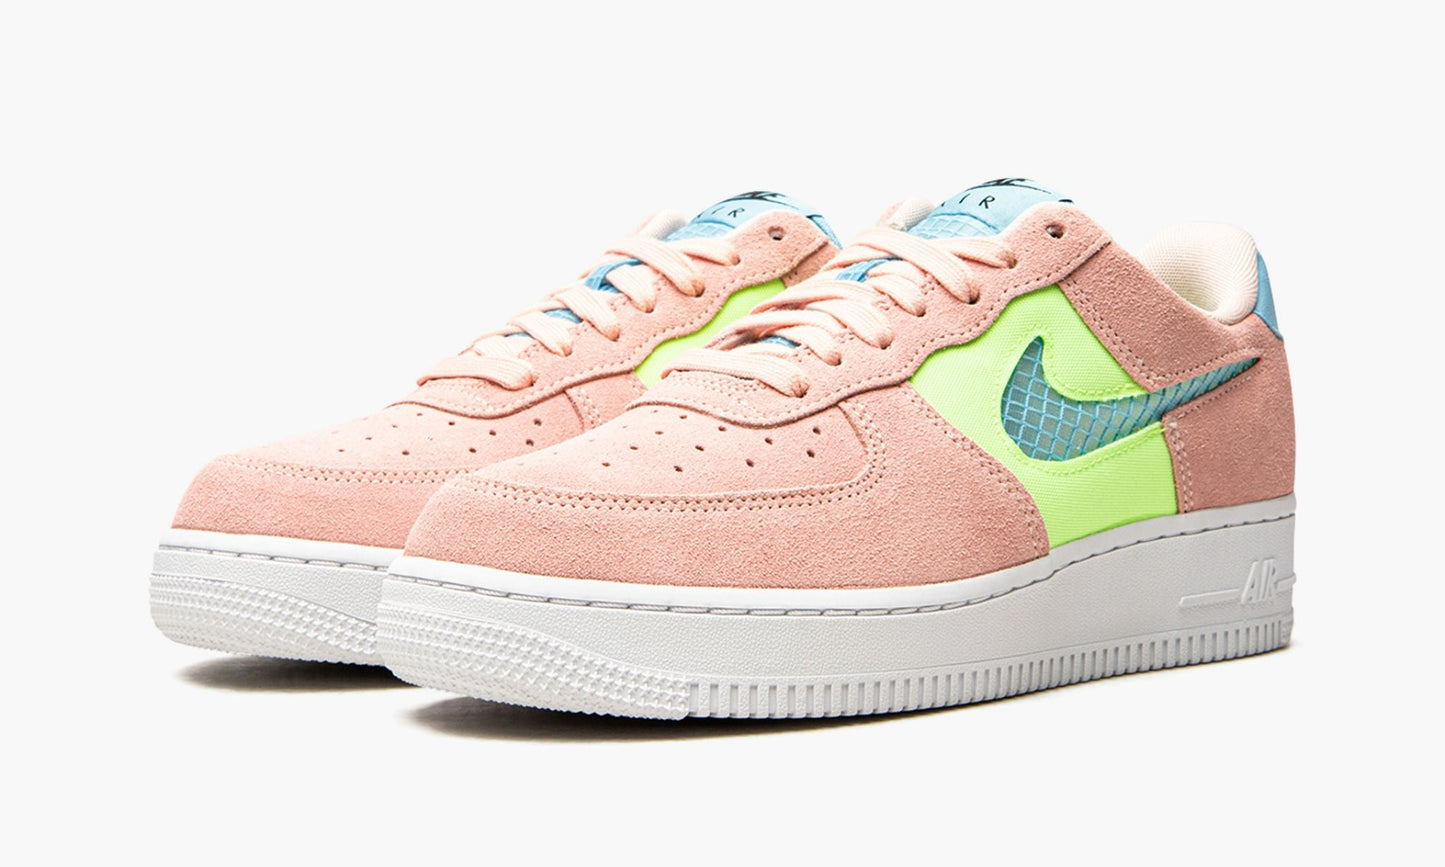 WMNS Air Force 1 Low "Washed Coral"